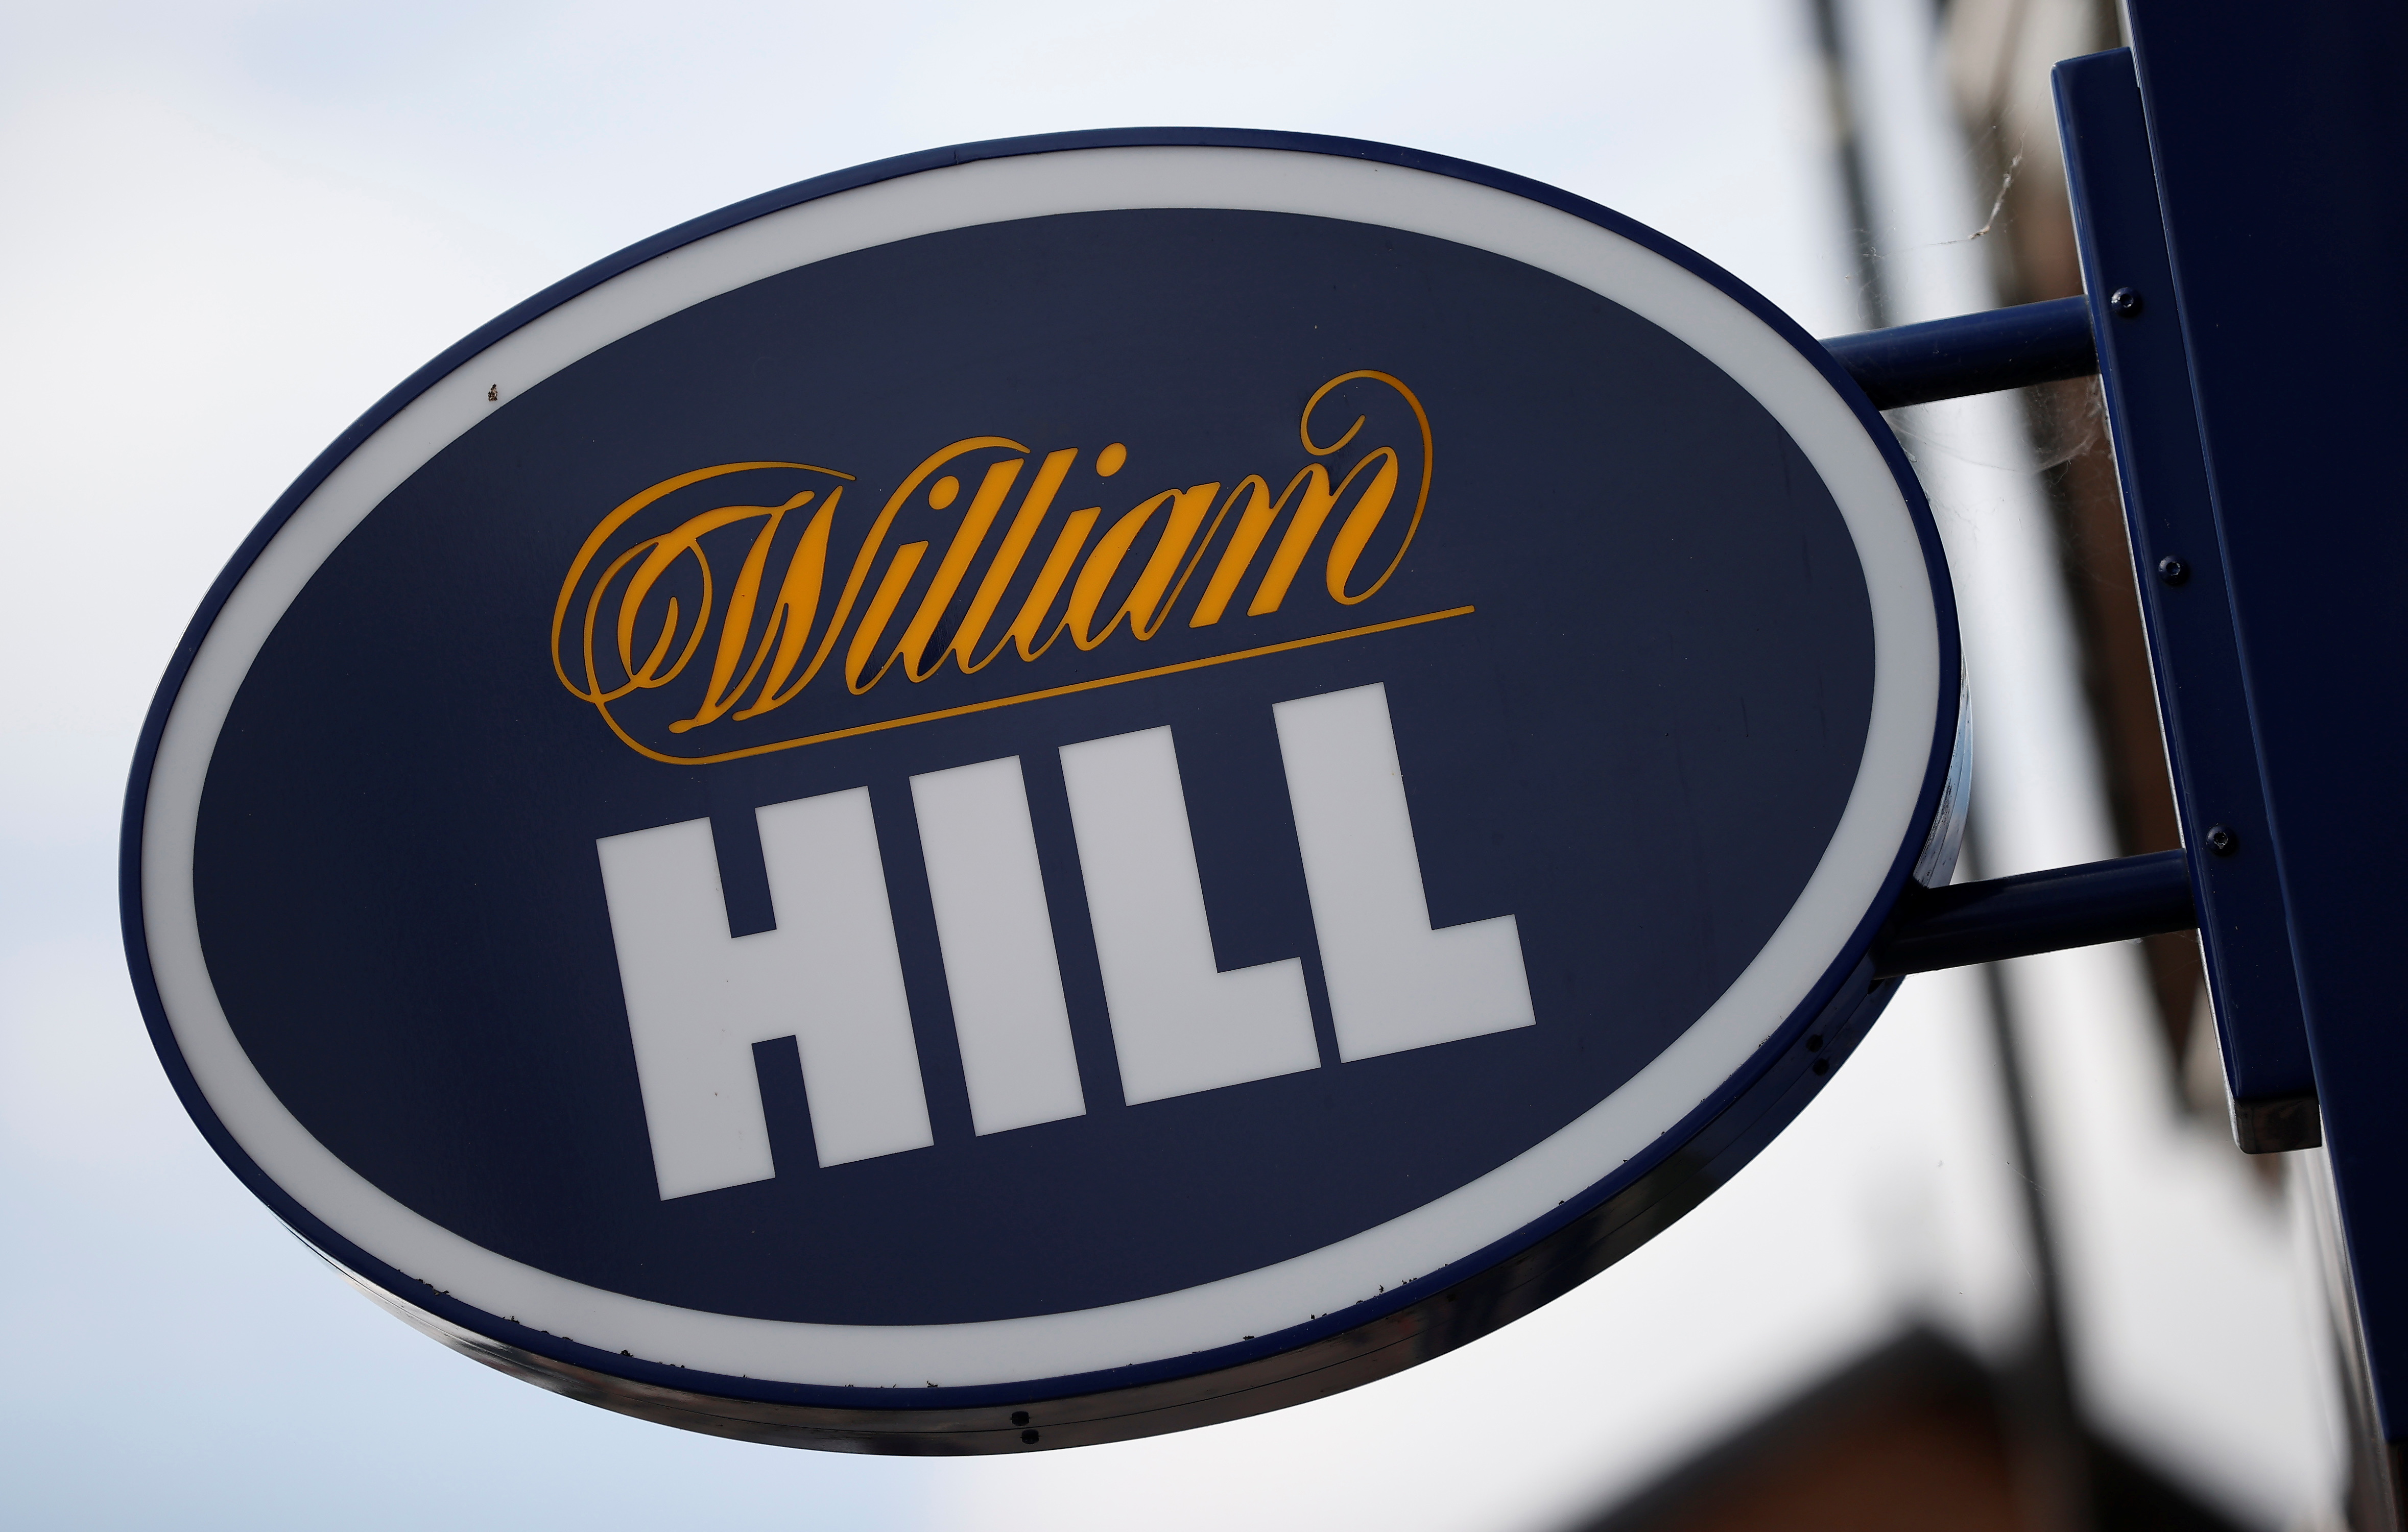 how many places are william hill paying , what do william hill pay for each way